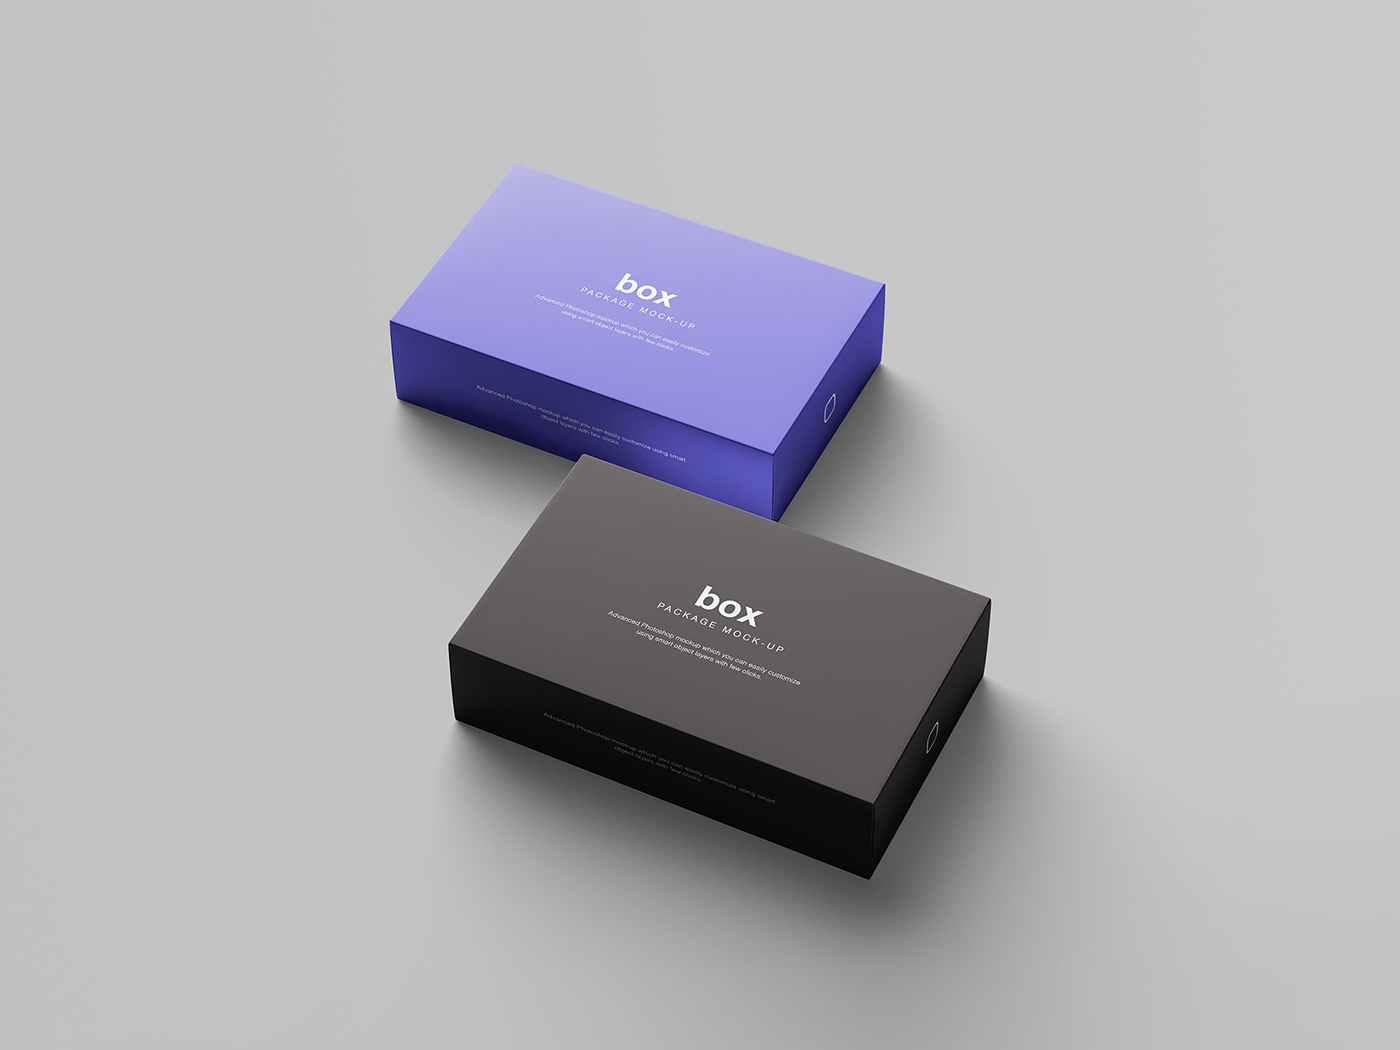 Download Box Packaging Mockup on Behance